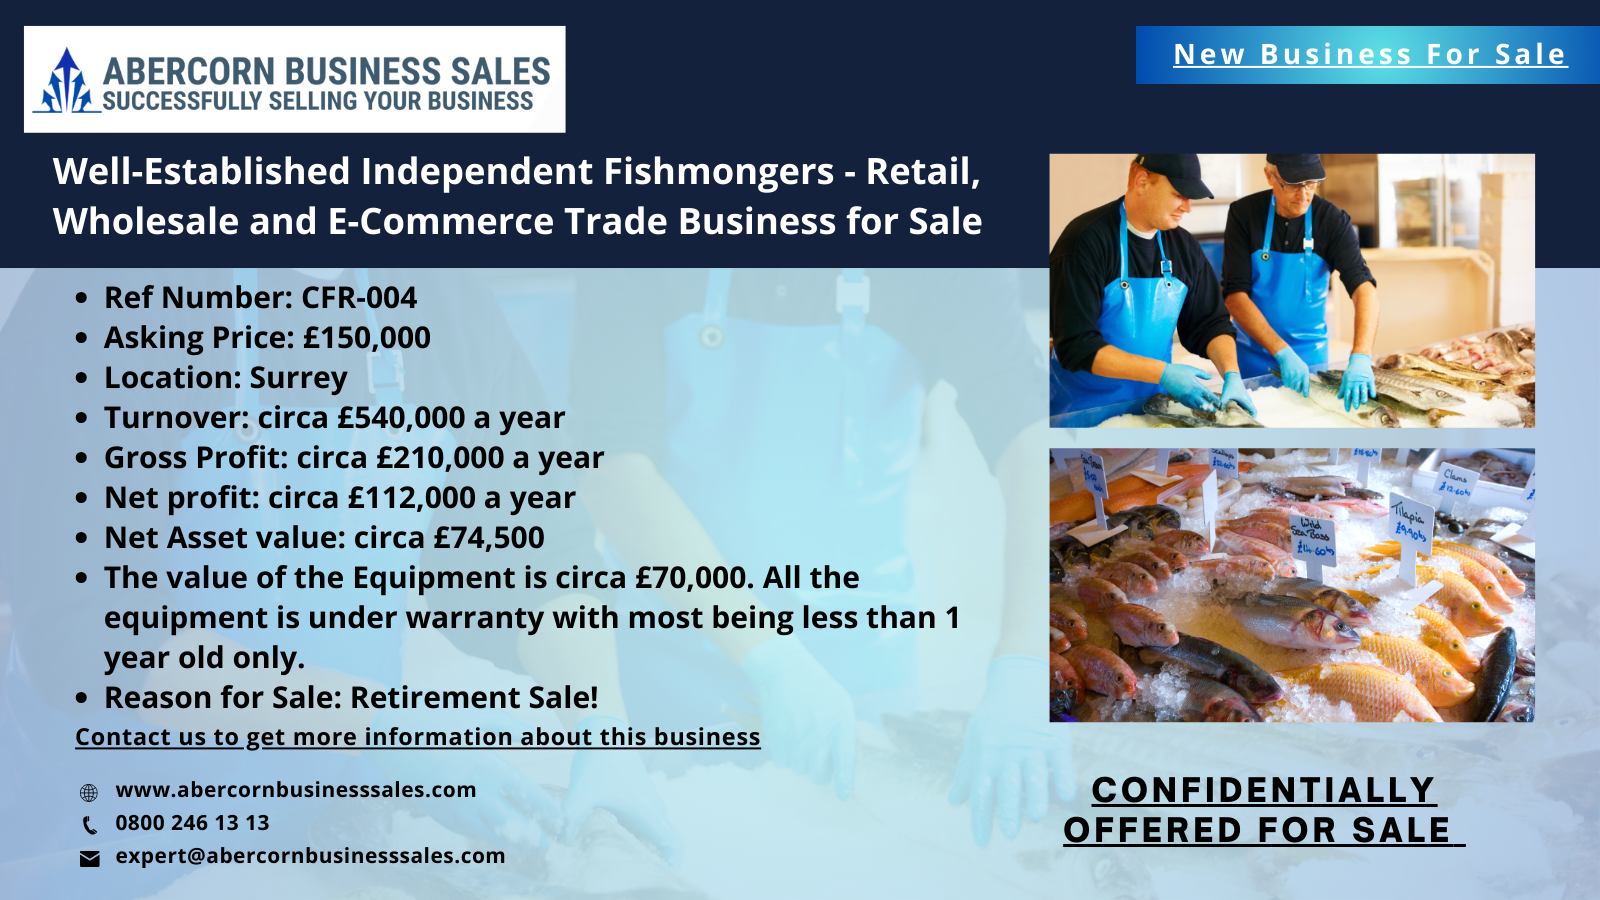 CFR-004 - Well-Established Independent Fishmongers - Retail, Wholesale and E-Commerce Trade Business for Sale